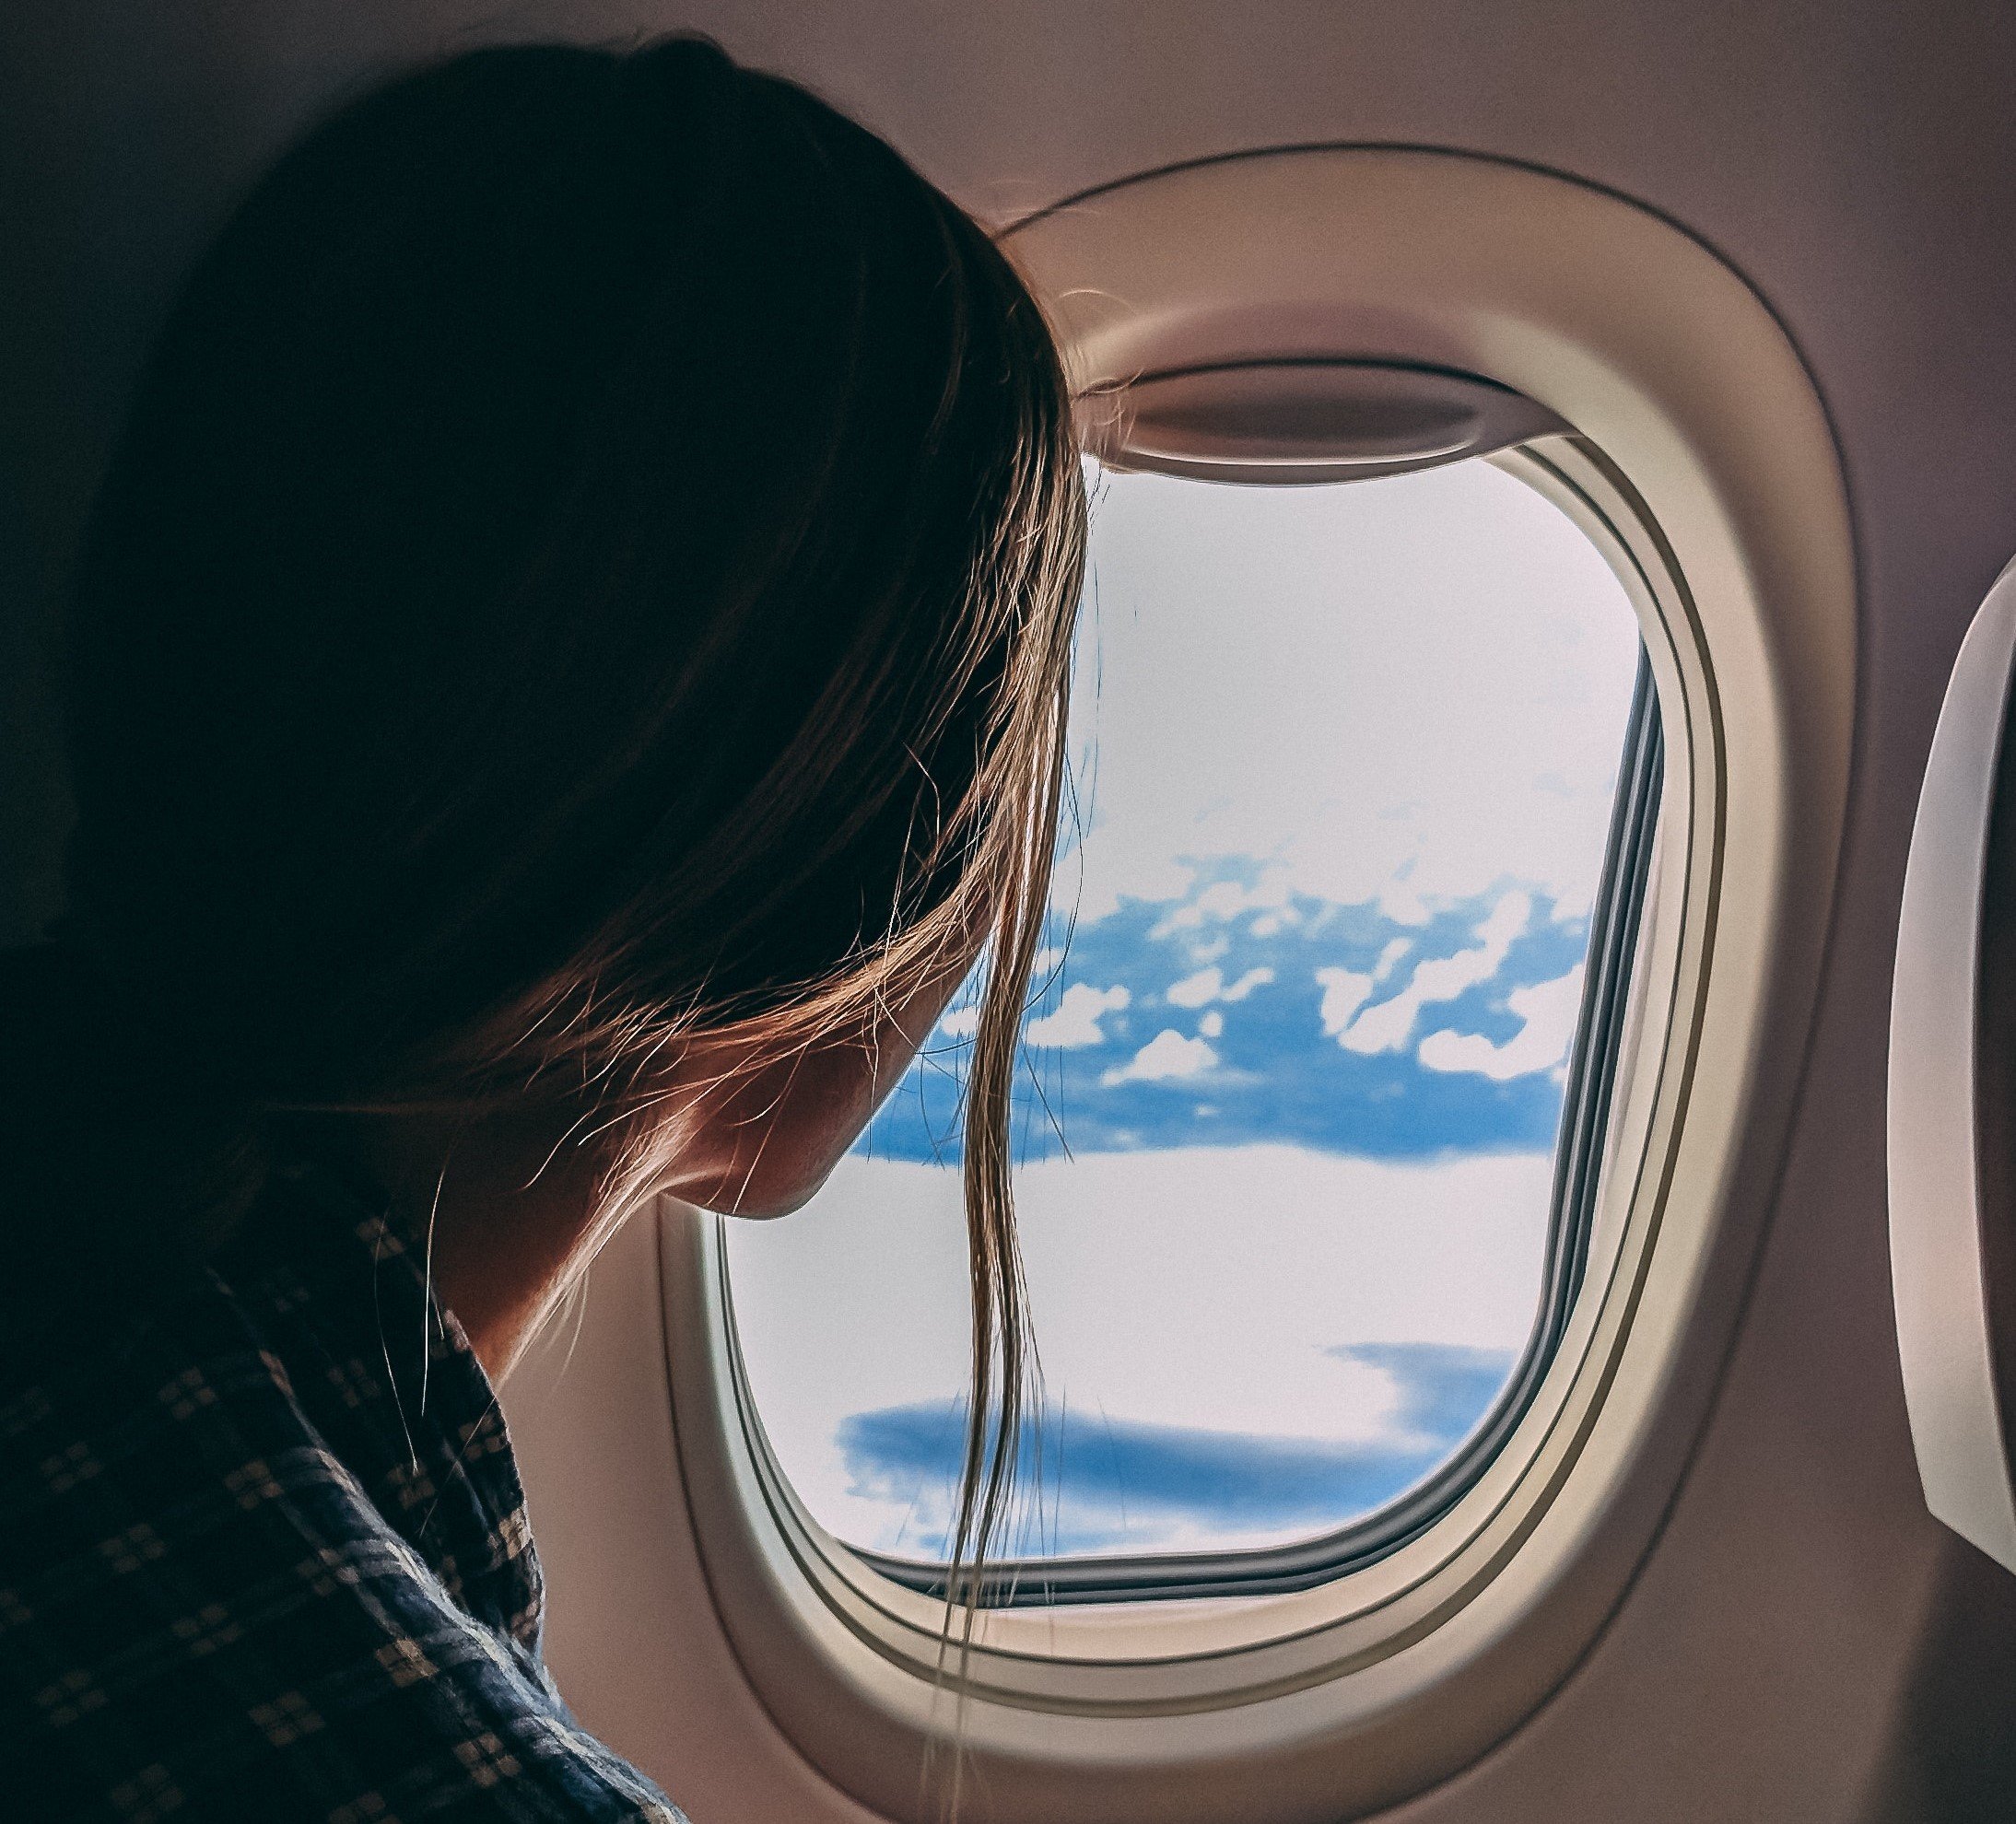 OP refused to give up her PTO since she wanted to go on an extended vacation around Europe. | Source: Pexels